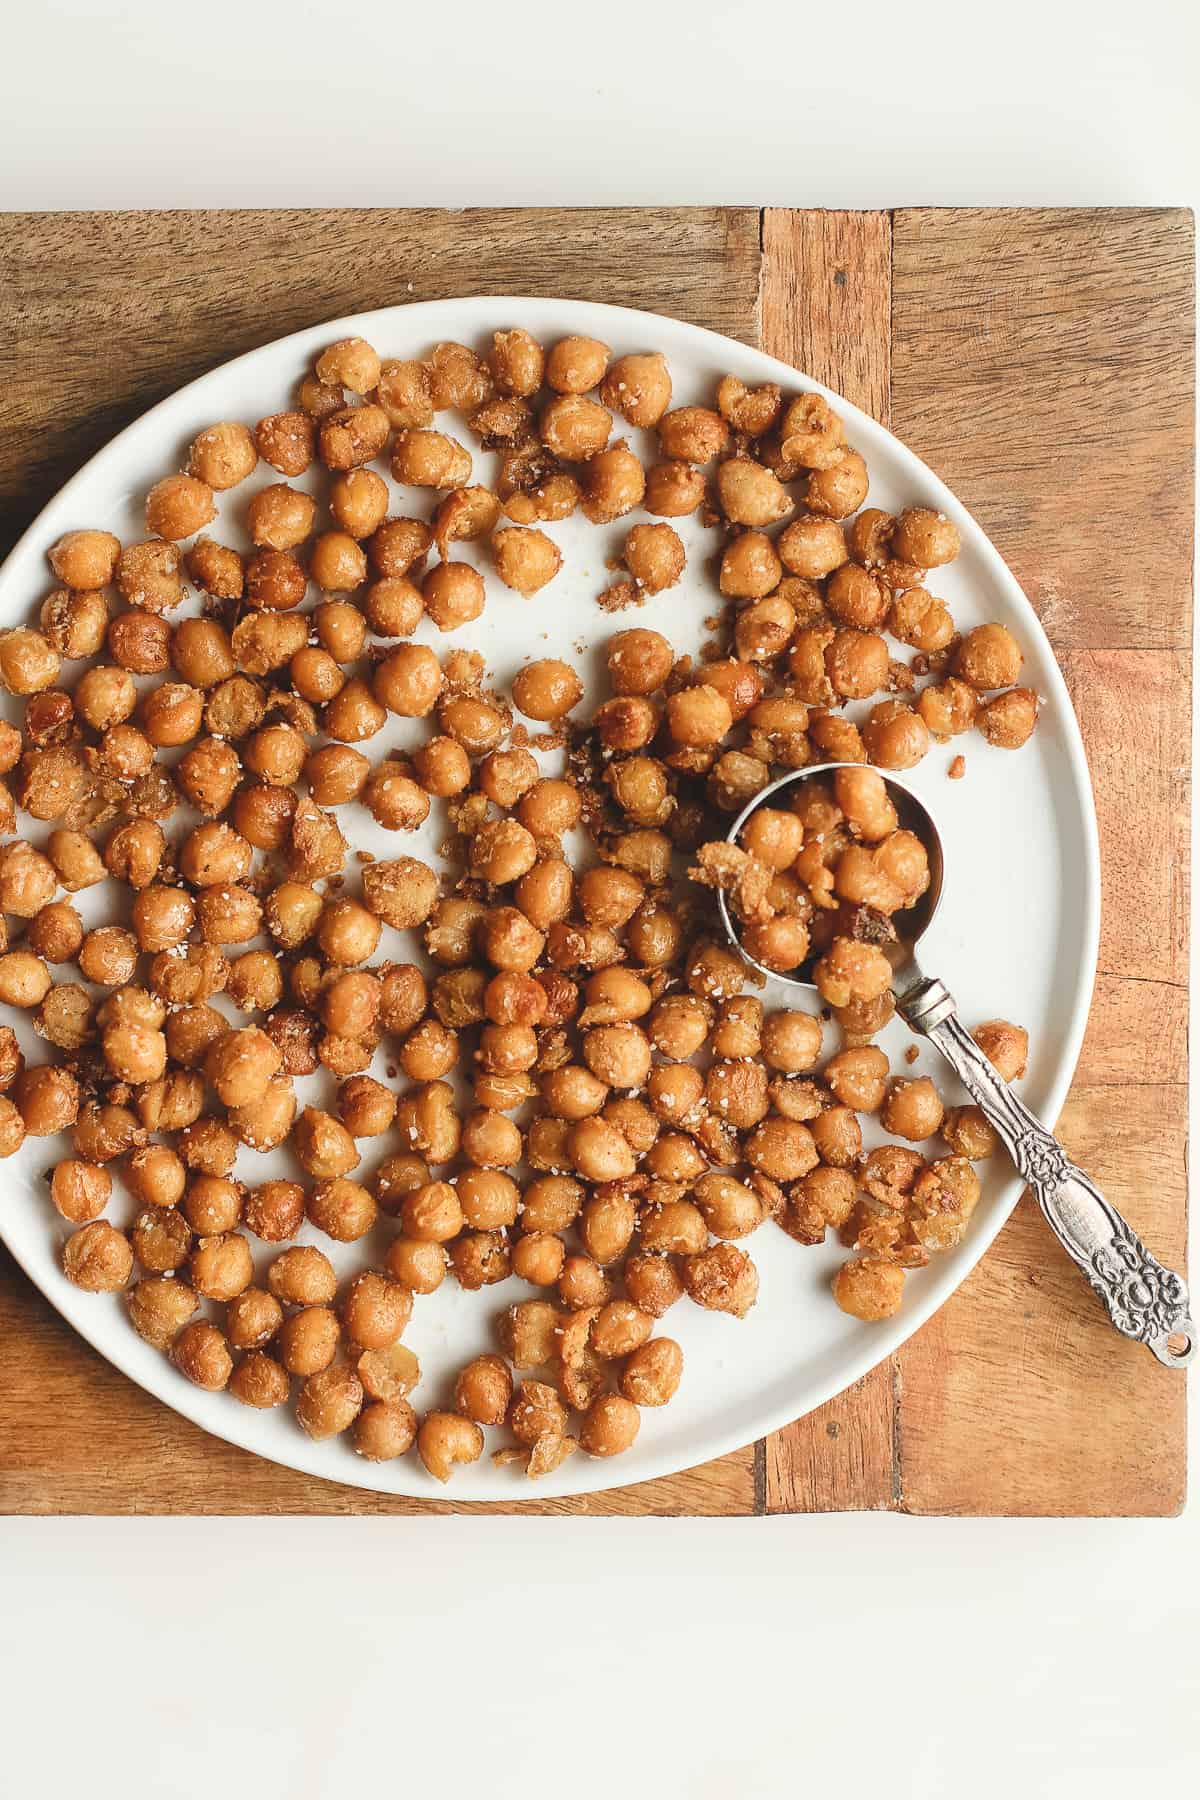 A plate of crispy chickpeas, with a tablespoon.